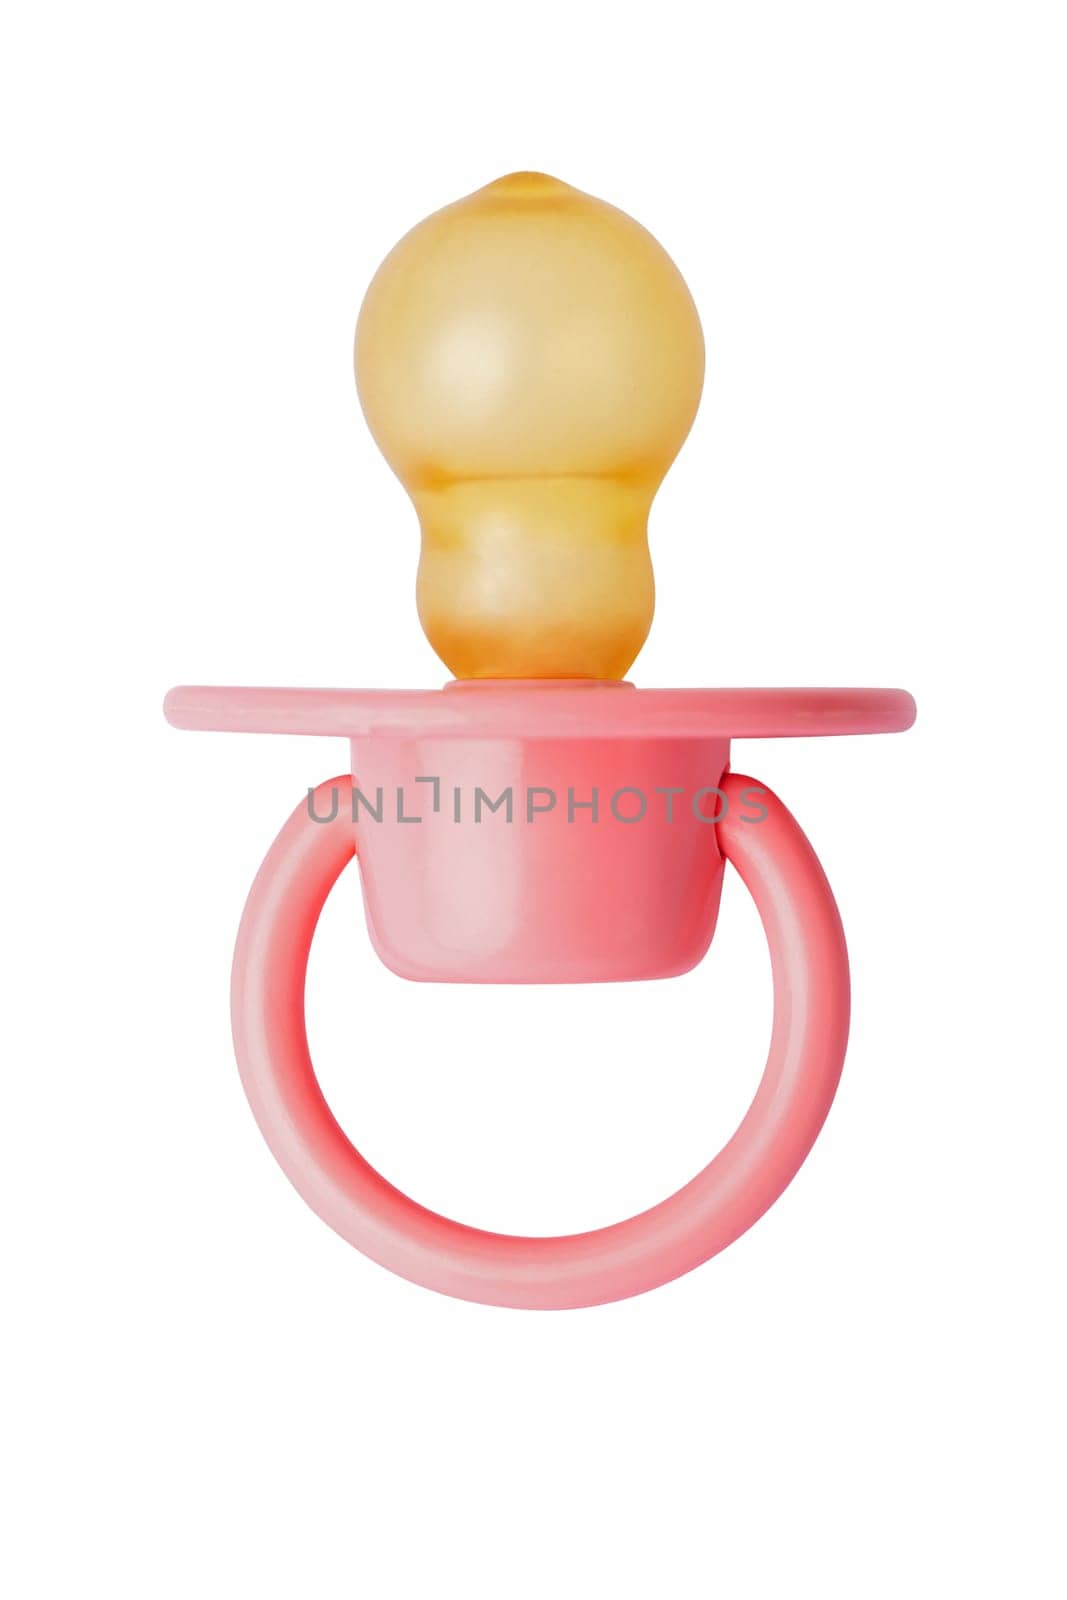 Orthodontic pacifier isolated on white. Pink baby pacifier on white background by andreyz